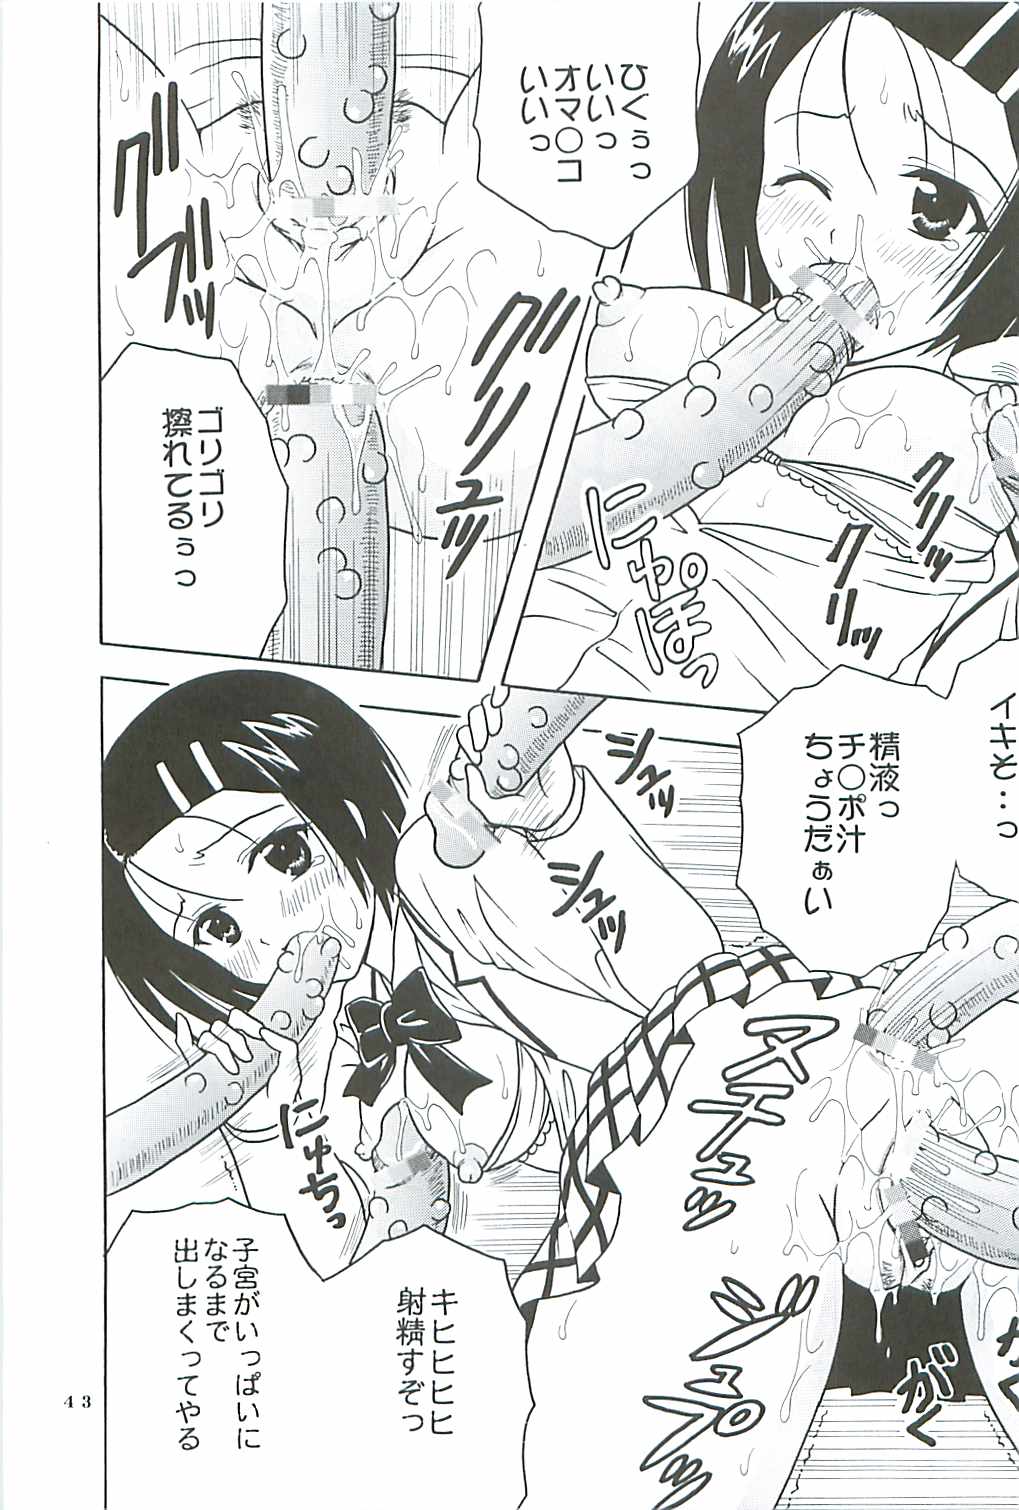 [St.Rio] ToLOVE Ryu 2 (To Love Ru) page 44 full